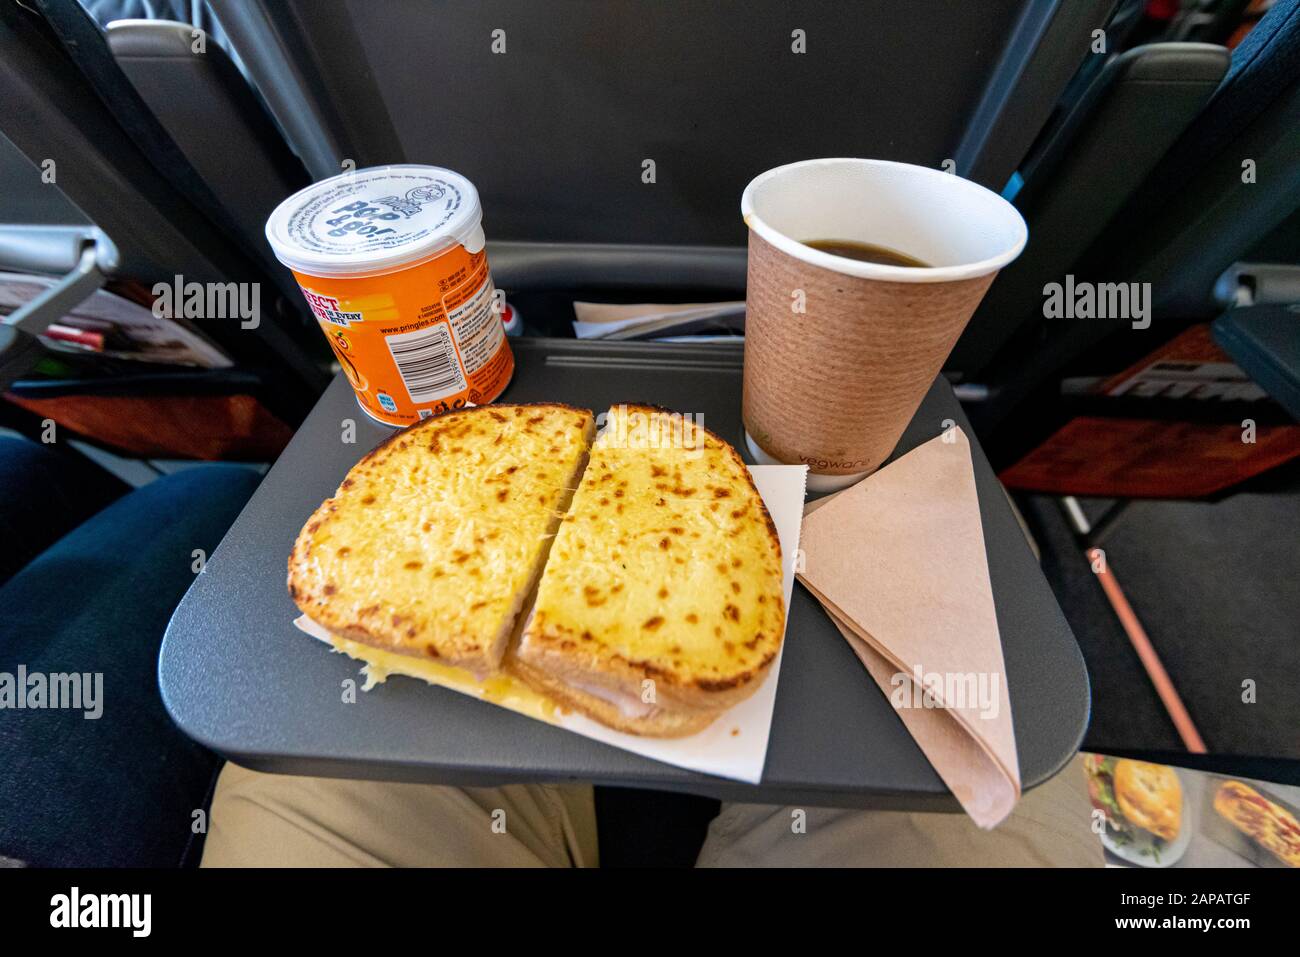 Meal deal food and drink on tray on an easyJet Airbus A320 NEO jet airliner plane. Ham and cheese toastie, Pringles crisps and coffee in flight meal Stock Photo